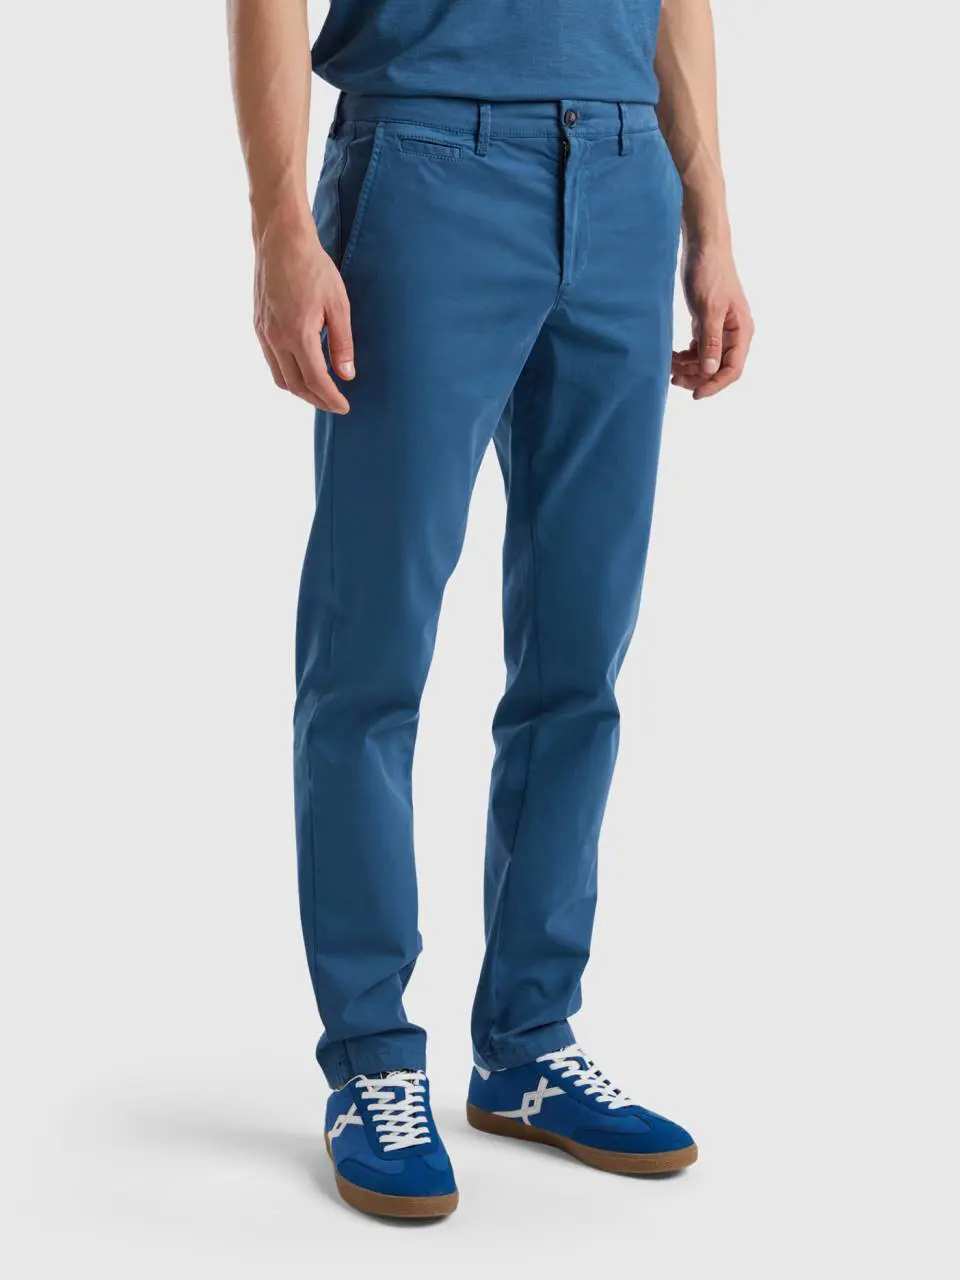 Benetton air force blue slim fit chinos. 1